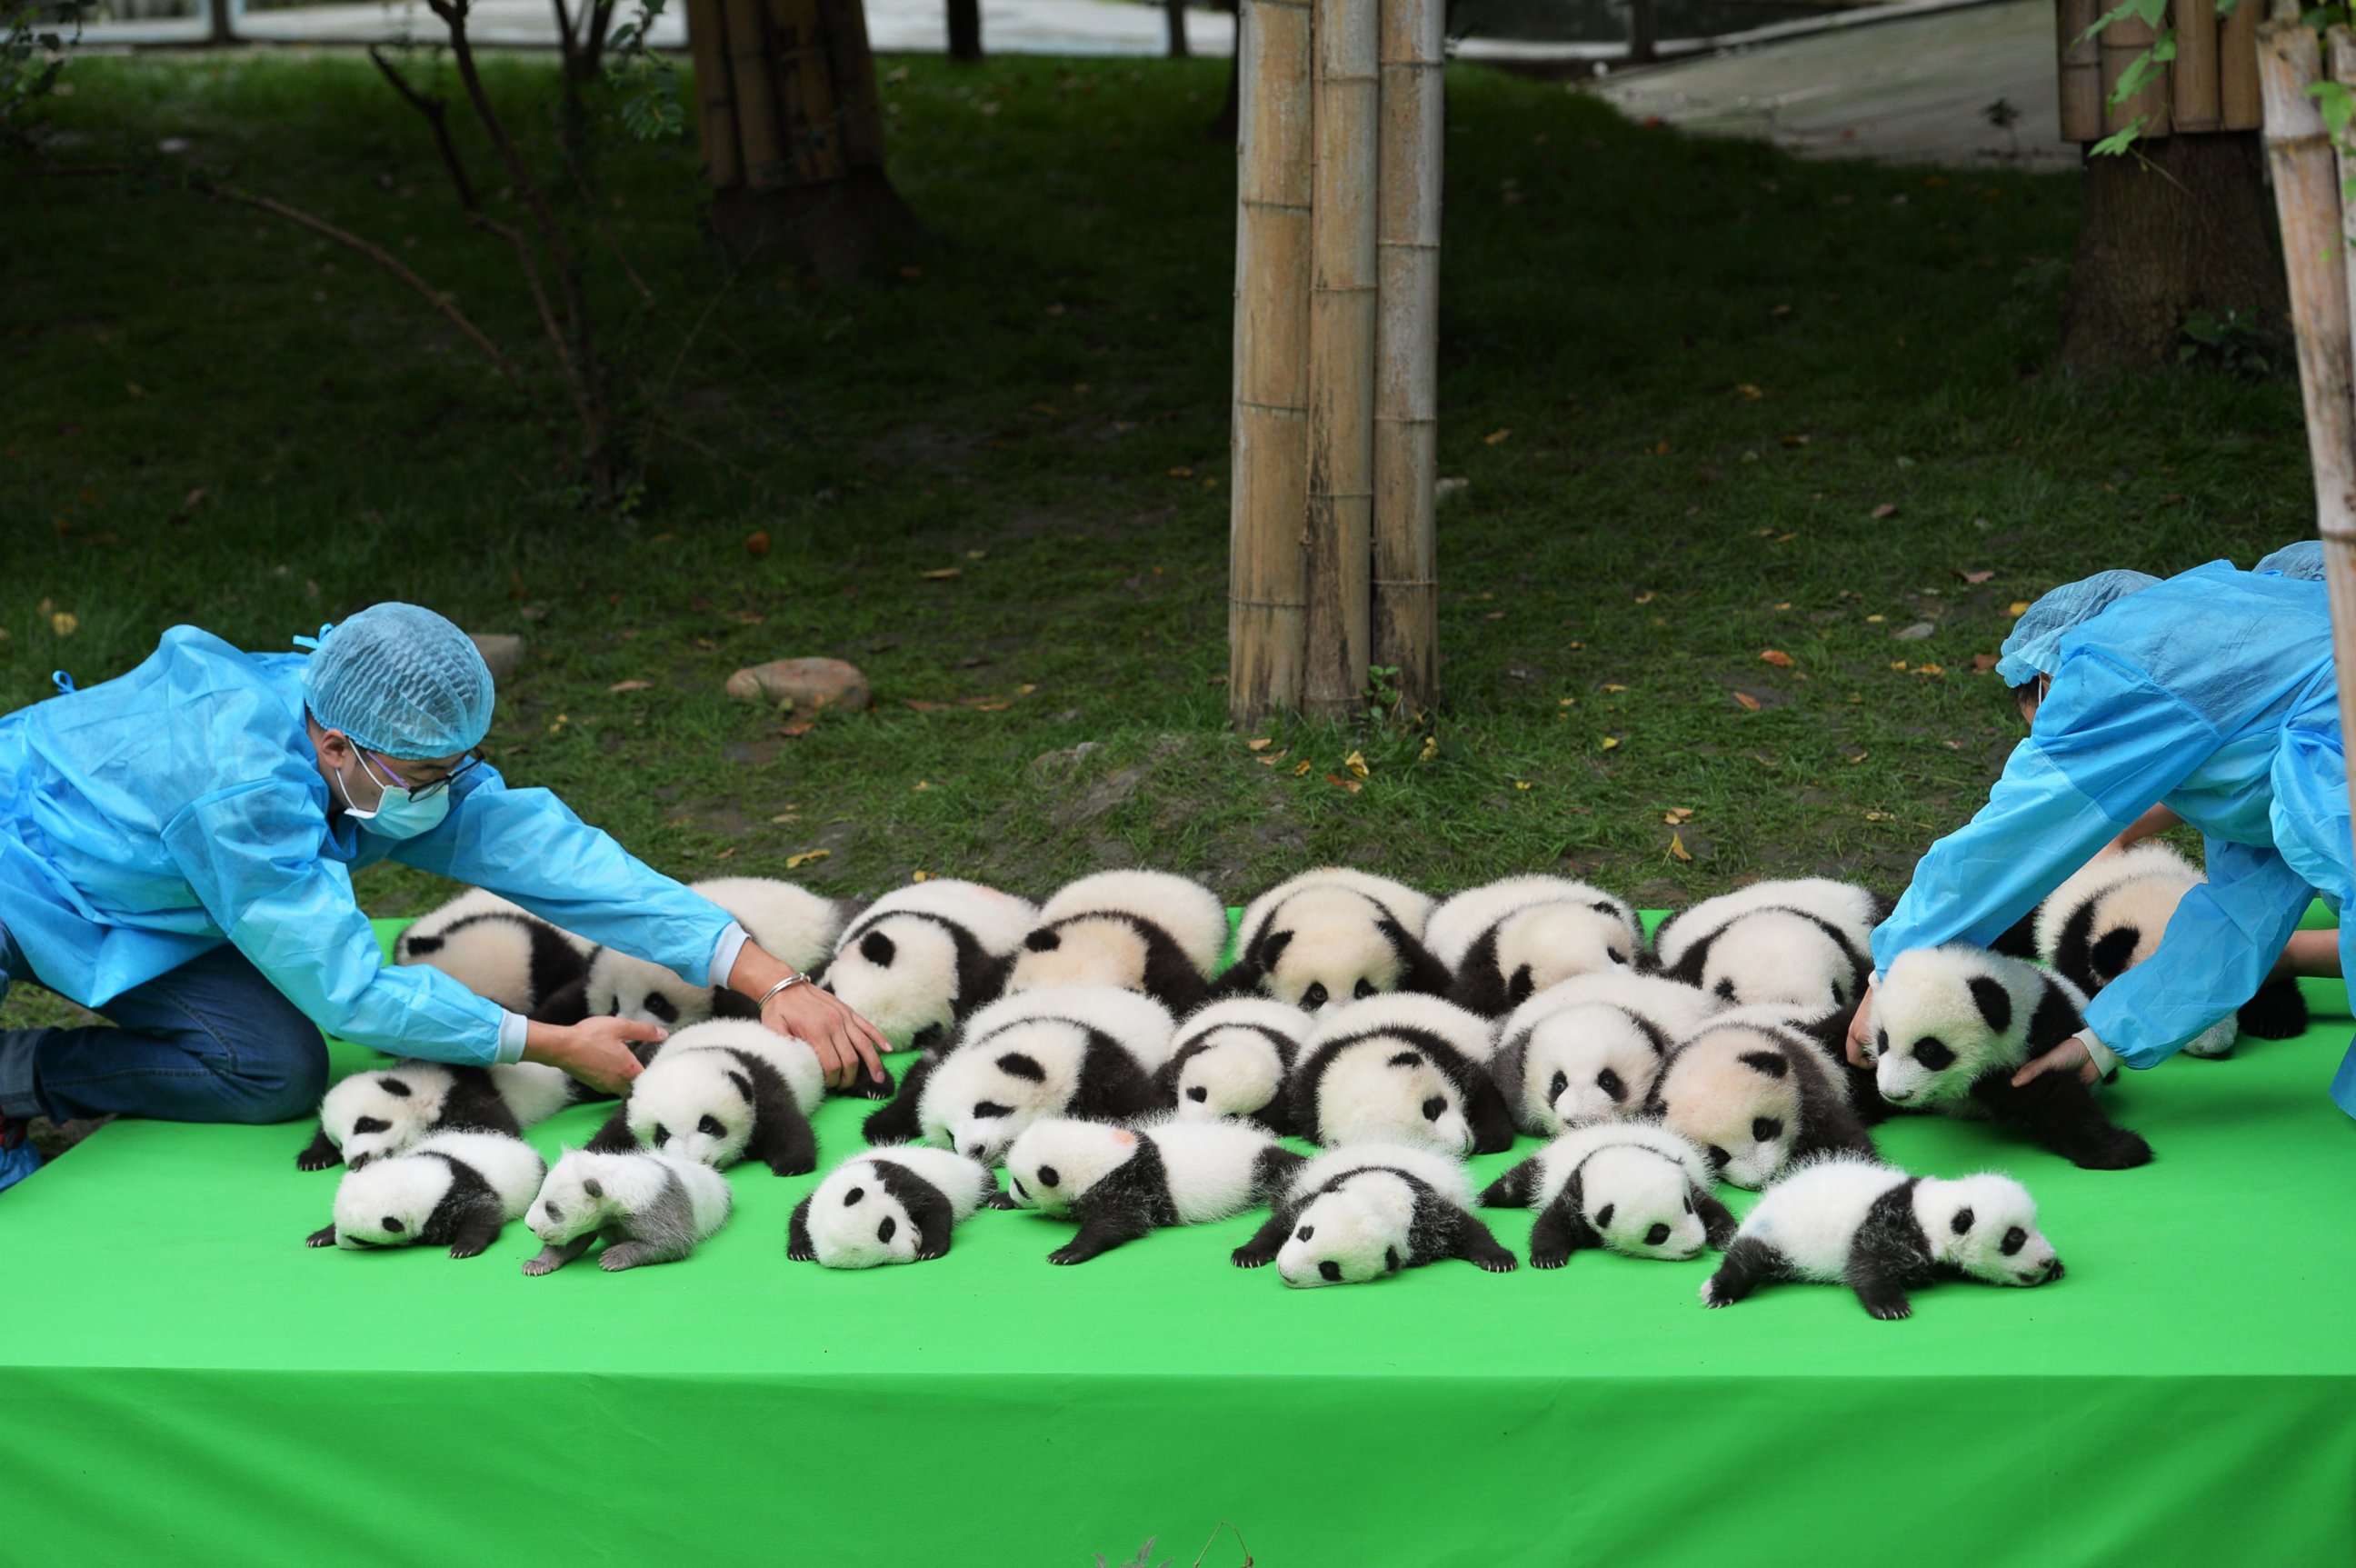 PHOTO: The 23 giant panda cubs born in 2016 at the Chengdu Research Base of Giant Panda Breeding make their debut to the public on Sept. 29, 2016 in Chengdu, China.